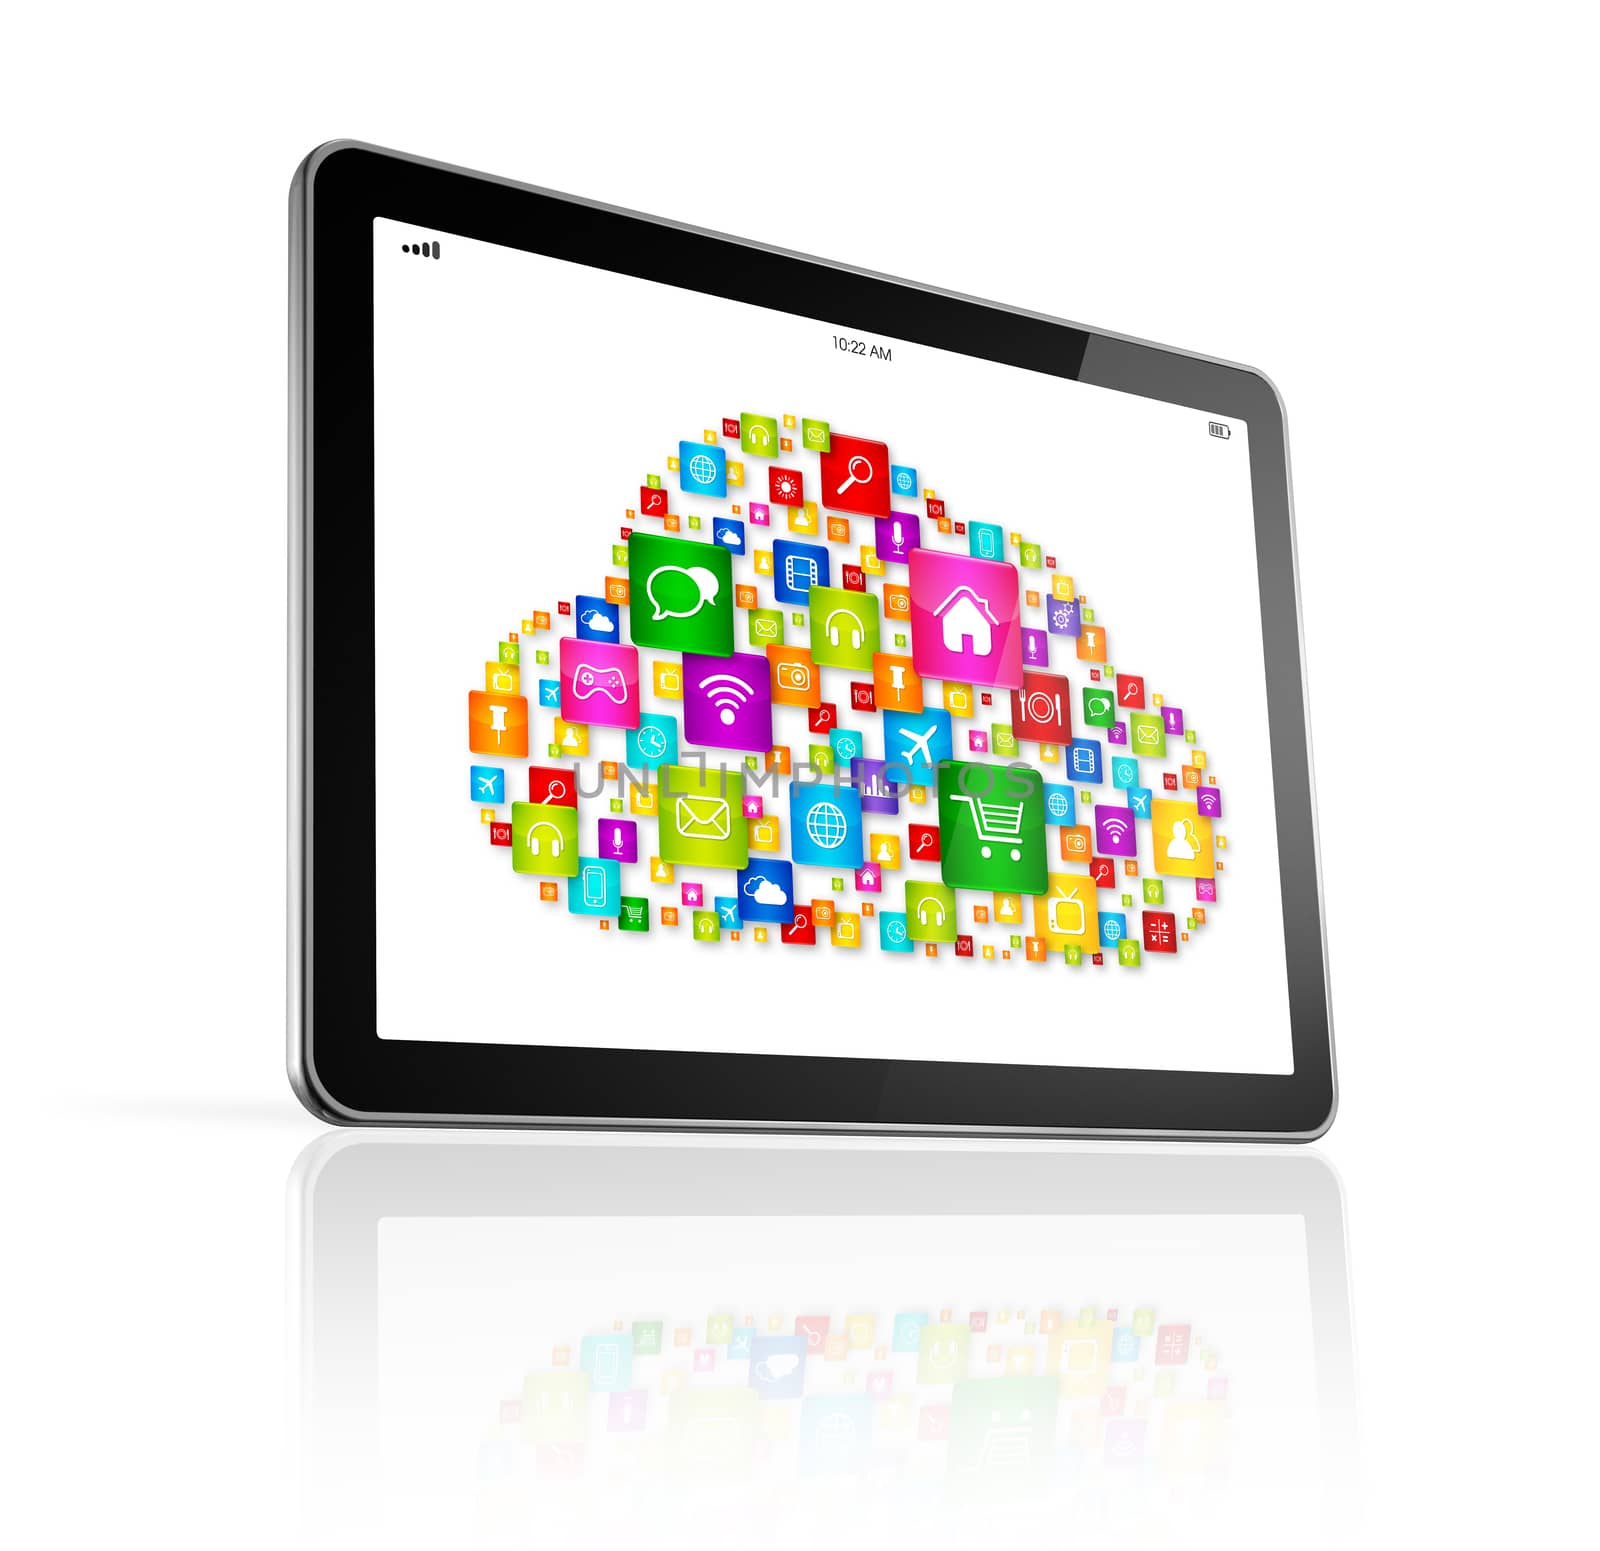 3D Cloud computing symbol on Digital Tablet pc - isolated on white with clipping path